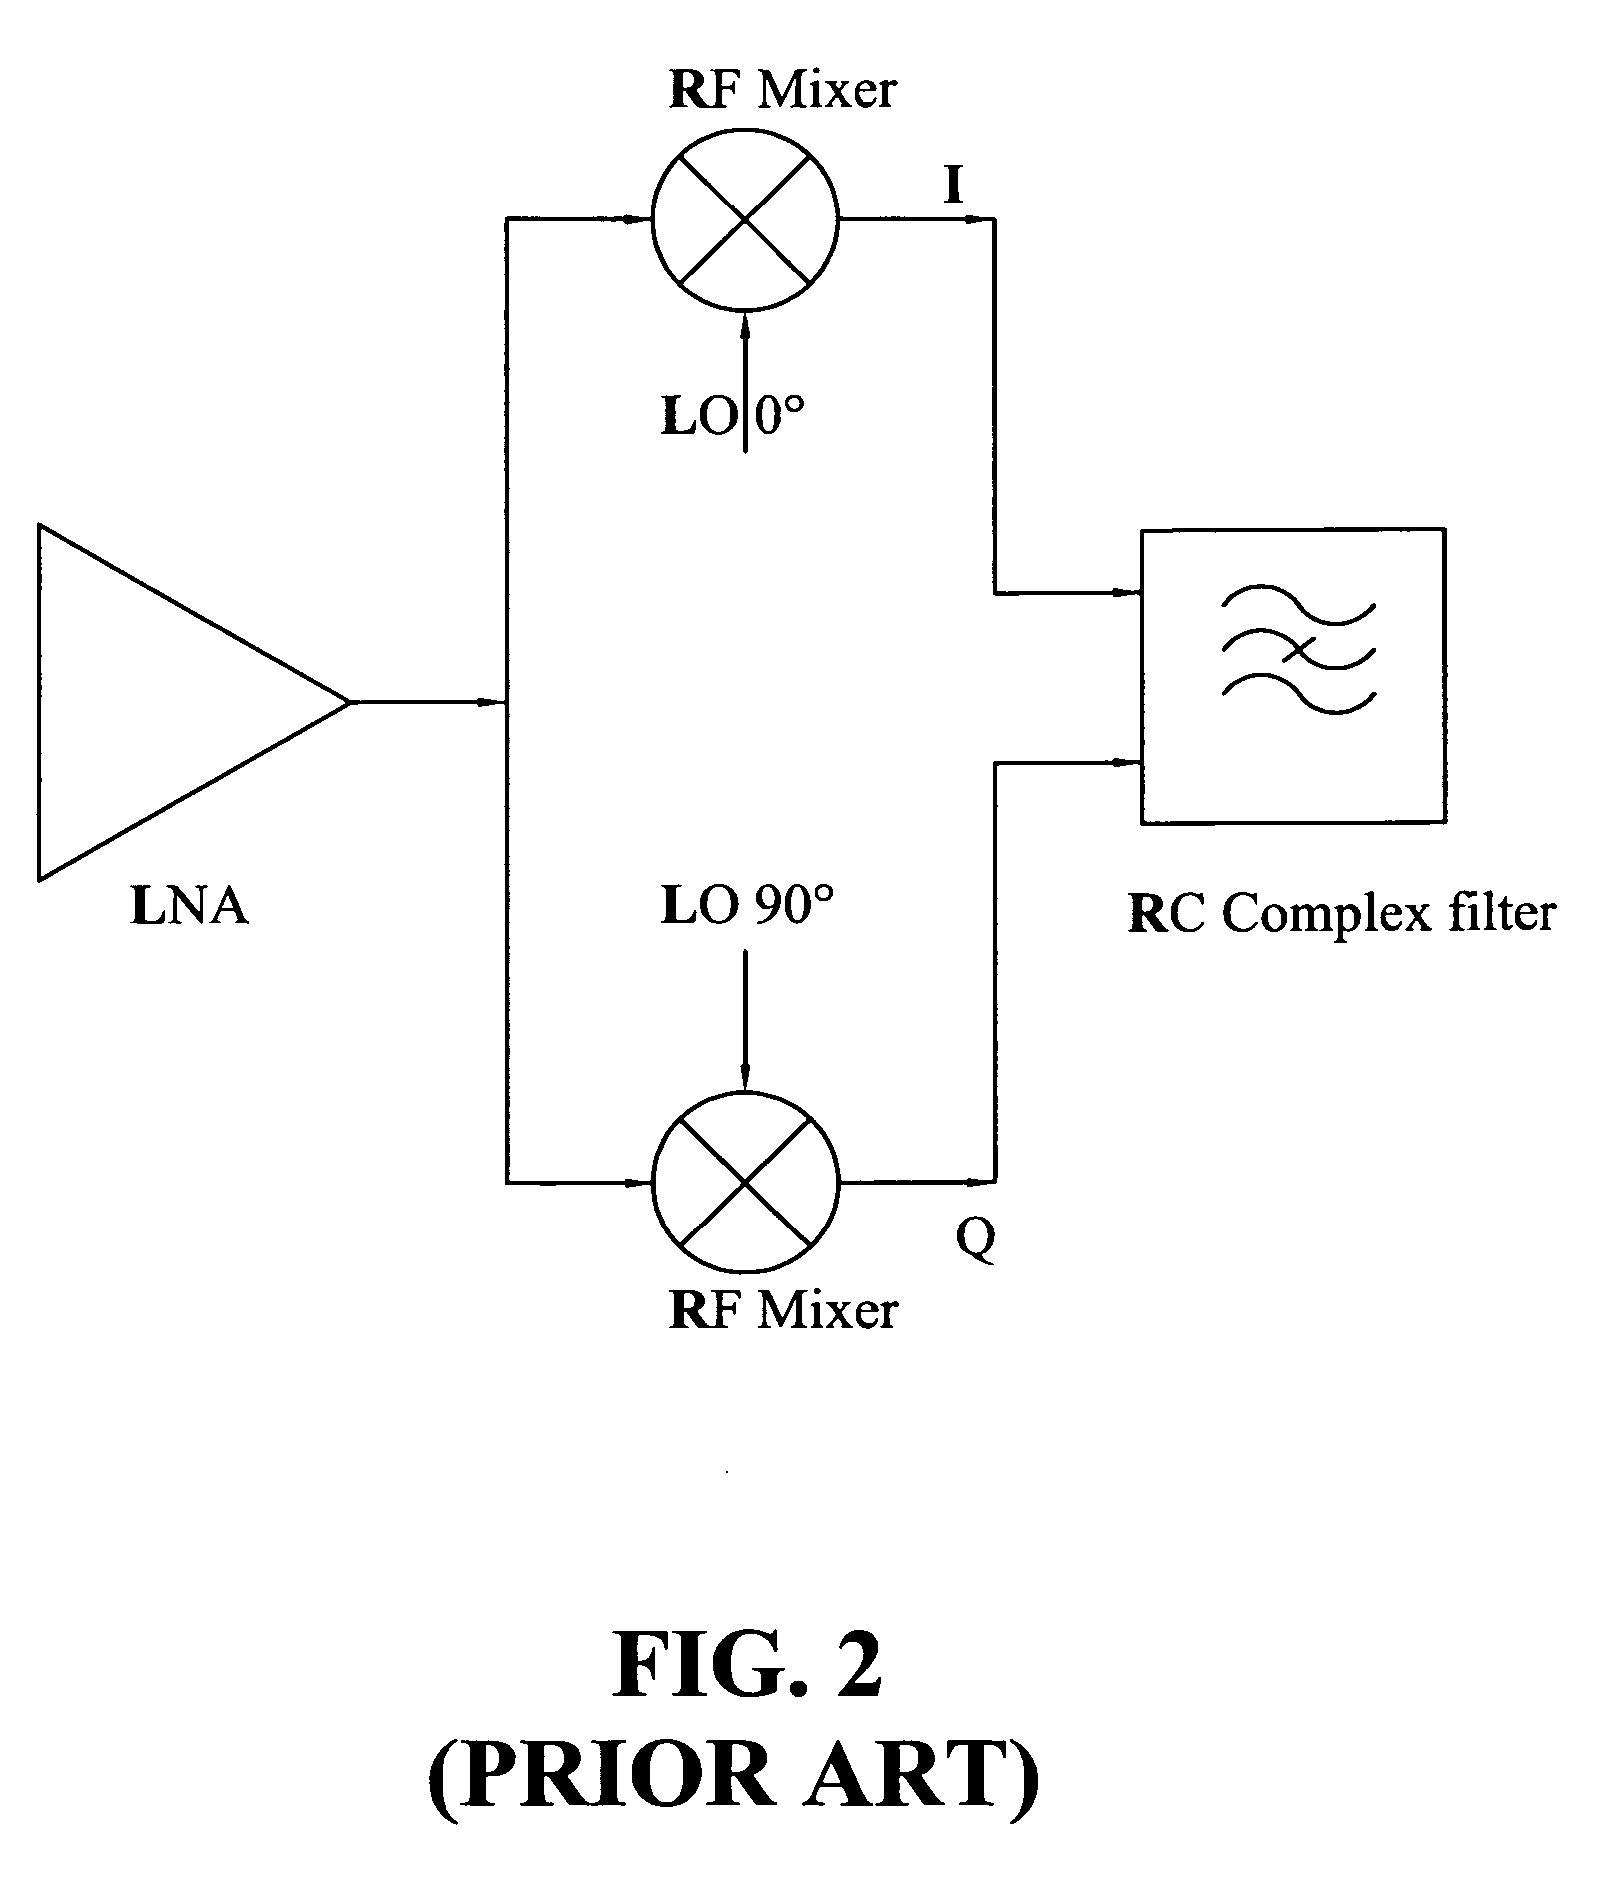 Radio frequency mixer with notch filter